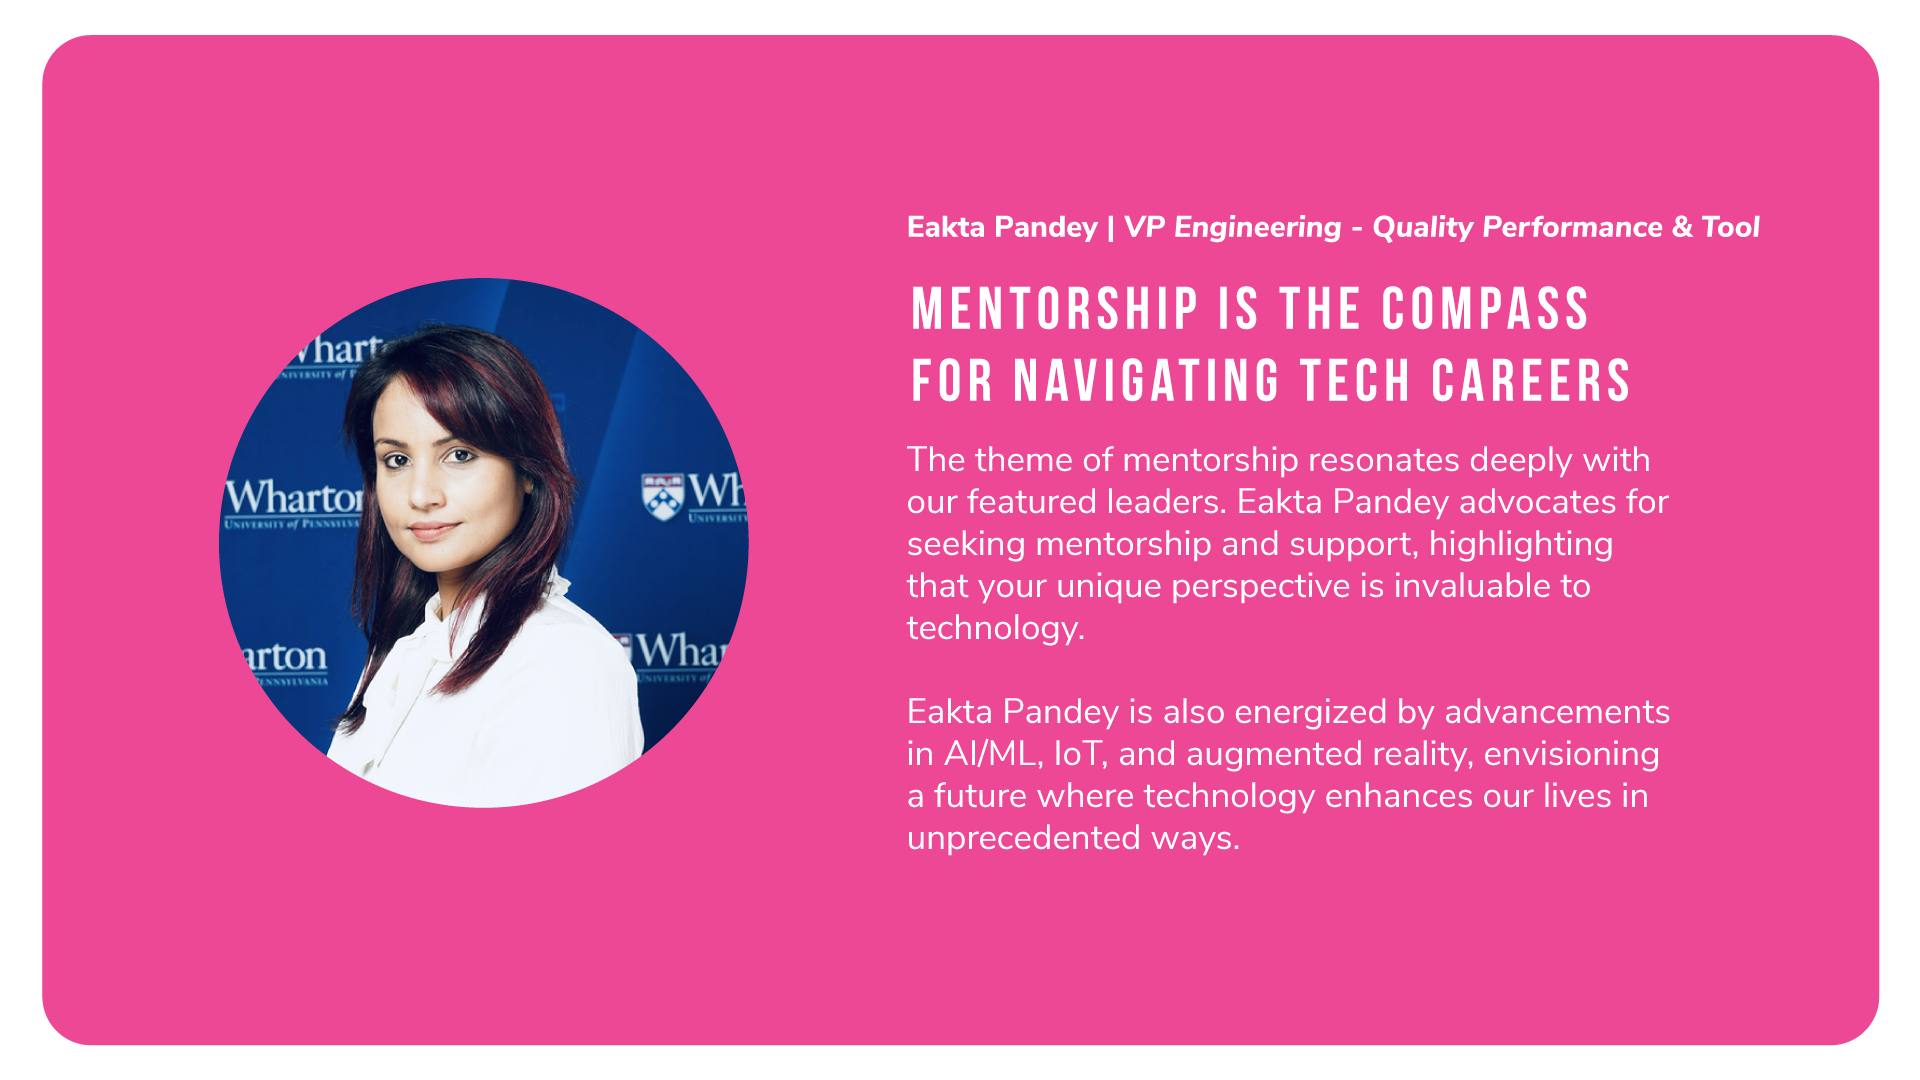 Eakta Pandey of Alkami says: Mentorship is the compass for navigating tech careers